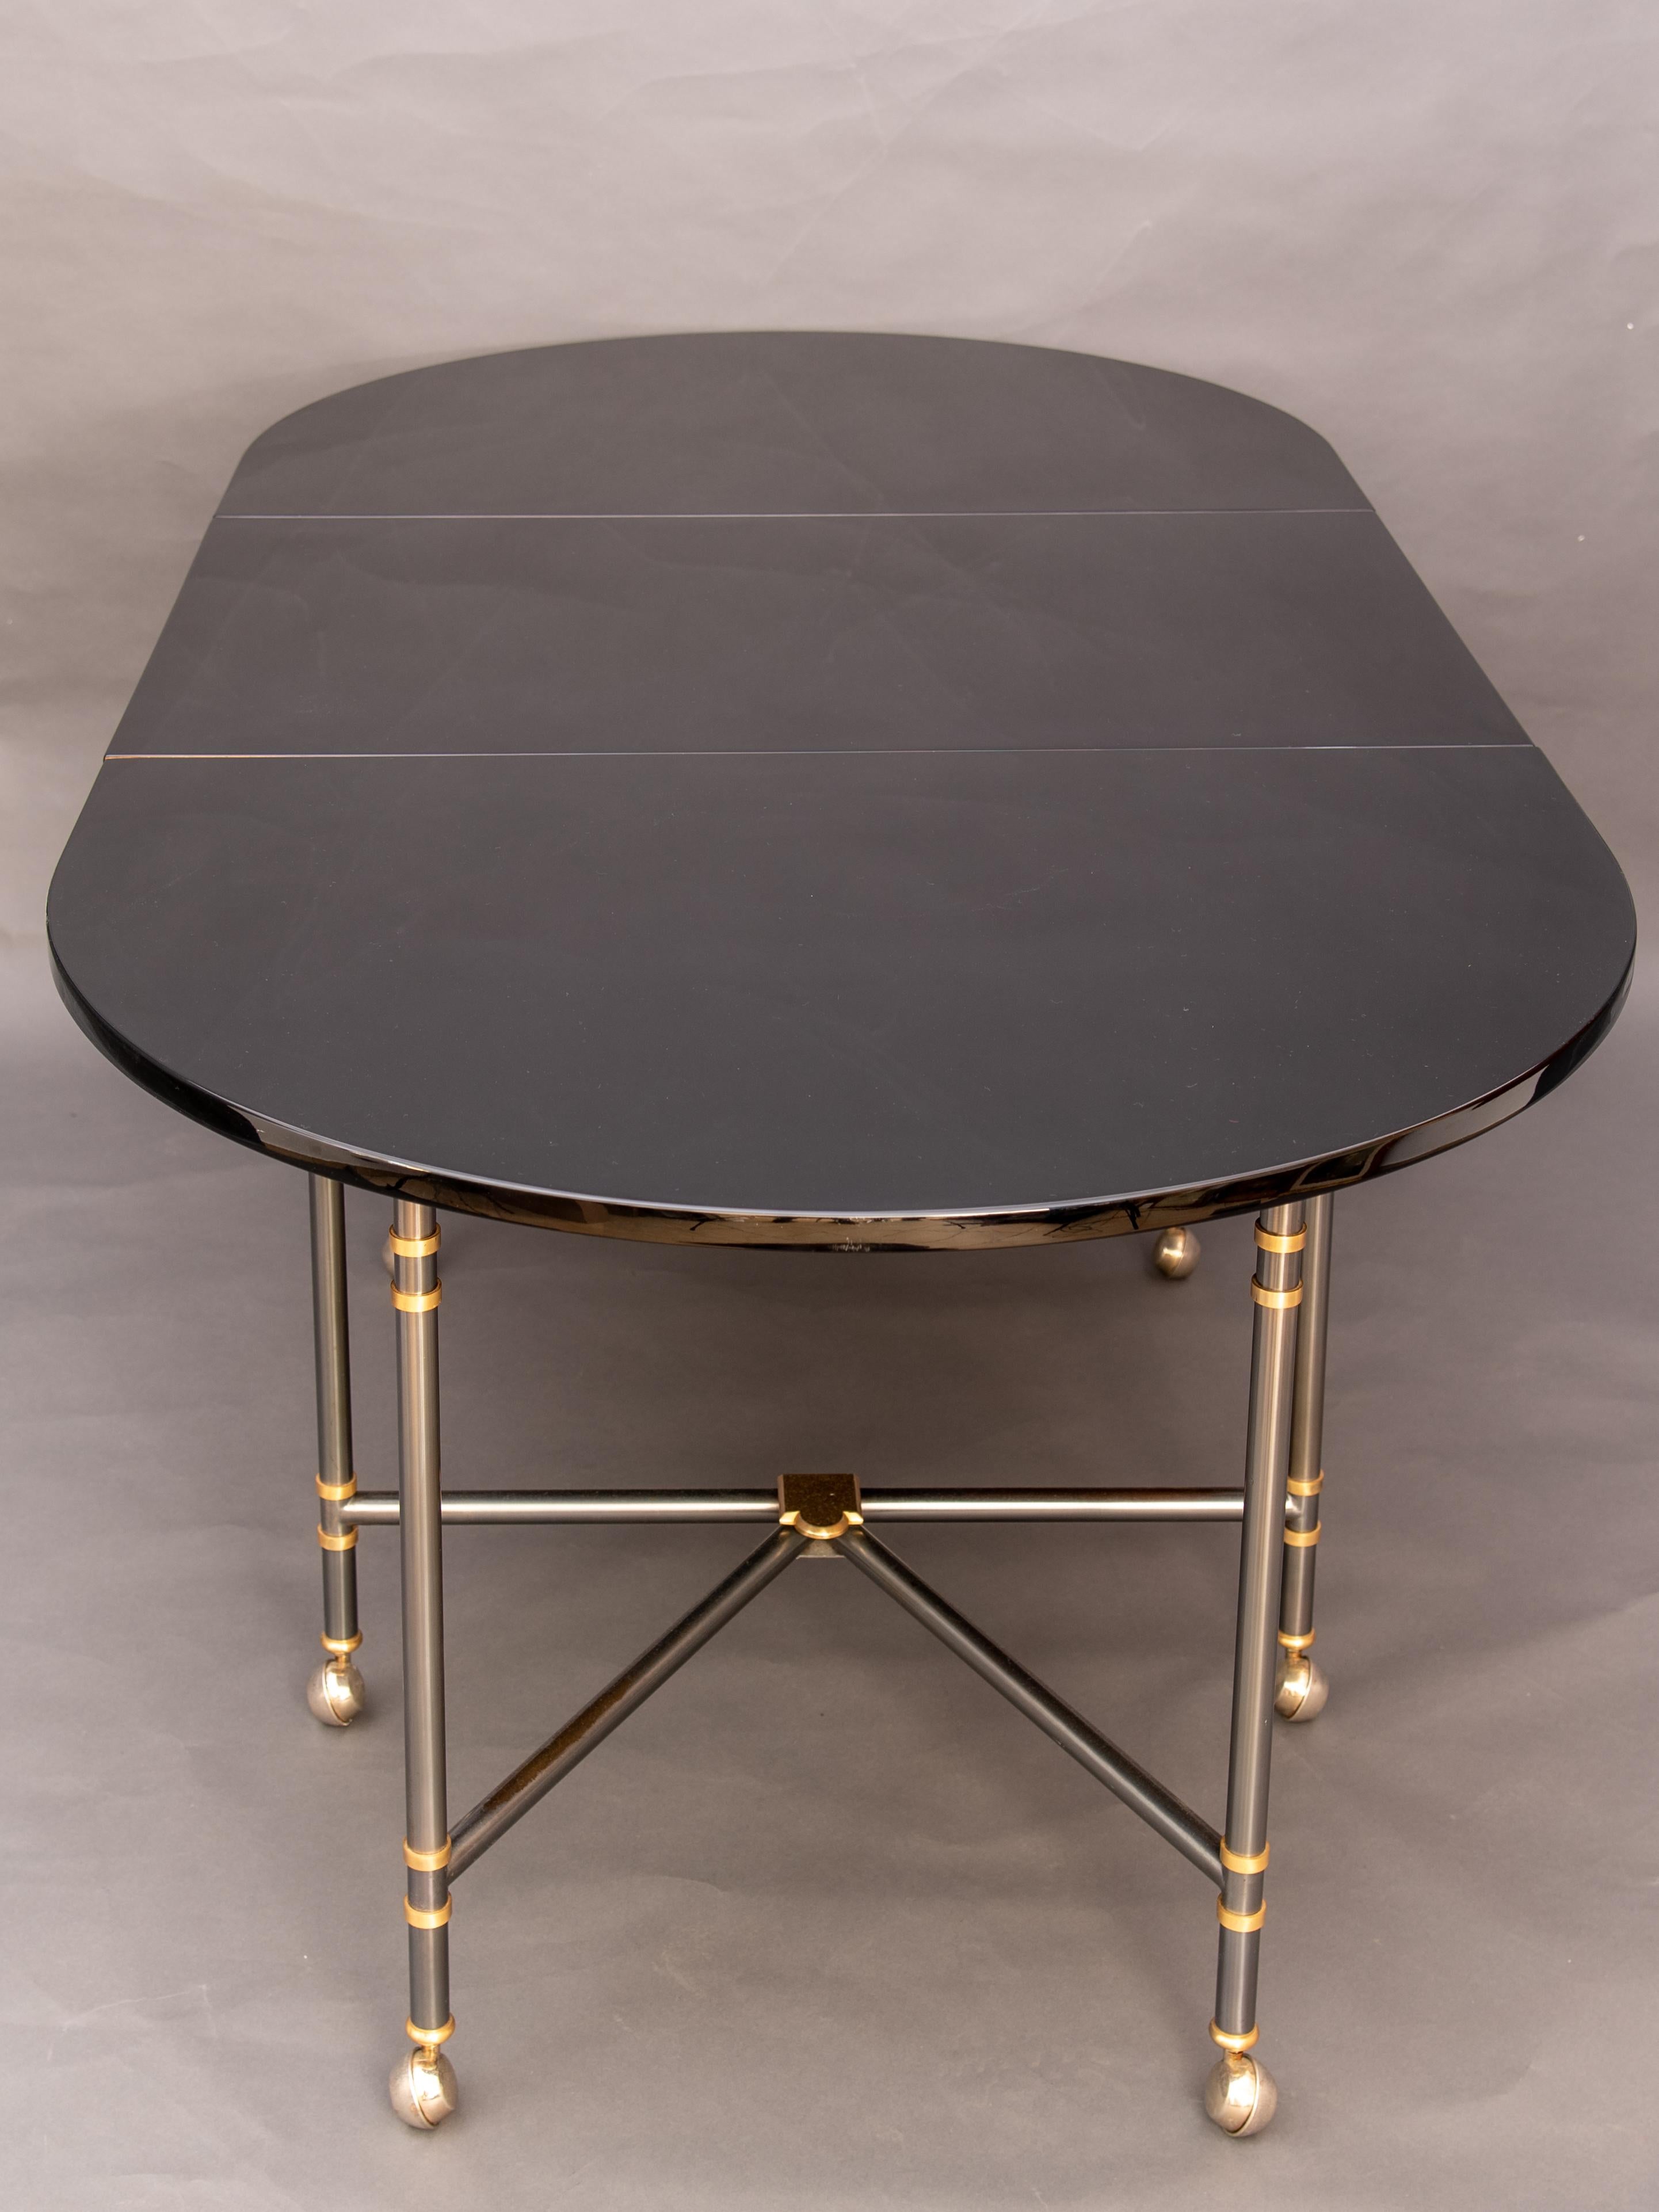 Maison Jansen Oval Black Lacquered France Dining Table Royal Model 5